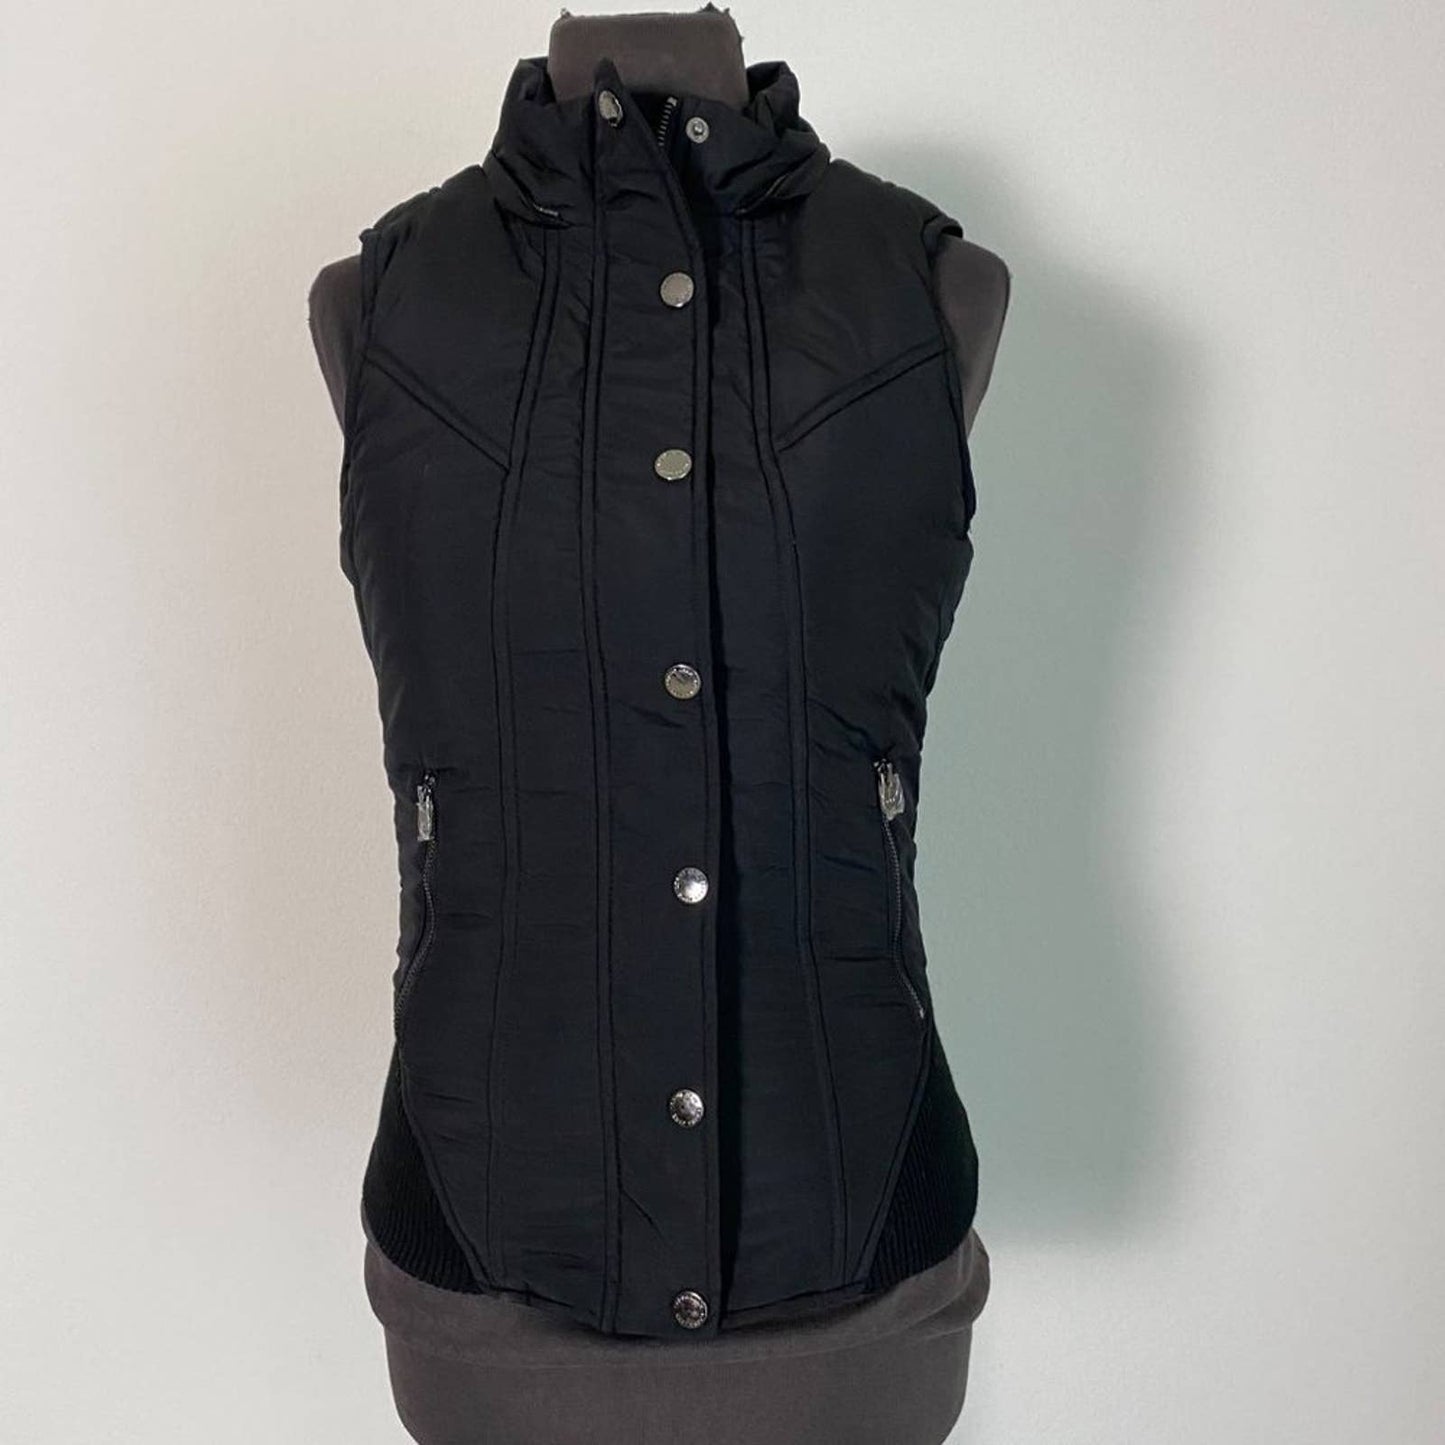 Lorna Jane sz S Cindy hooded puffer fitted puff vest NWT